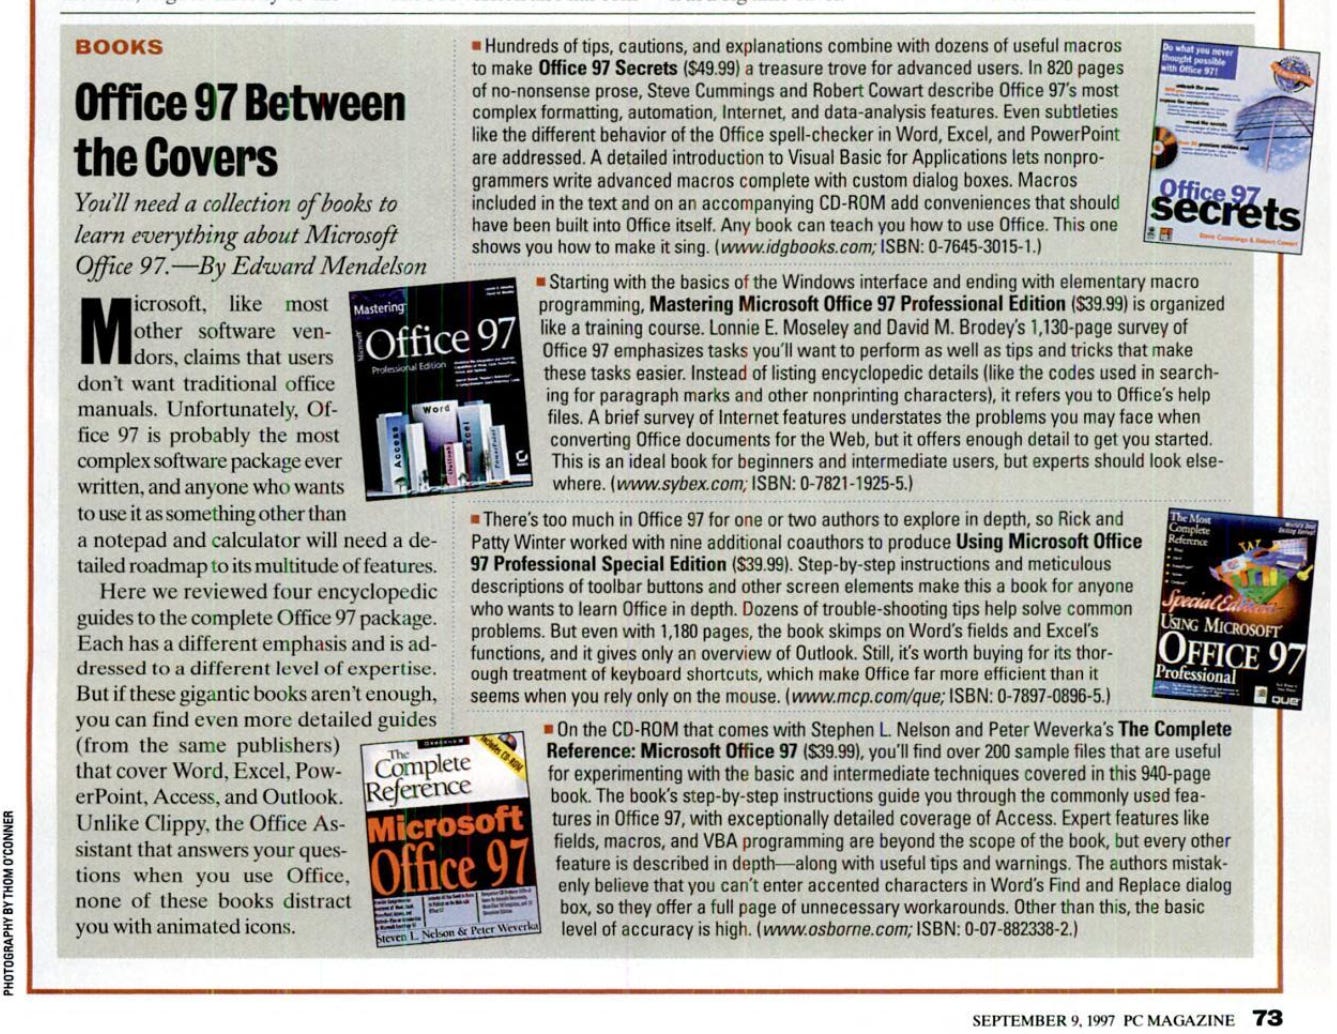 Screen shot of PC Magazine article showing four different books on how to learn Office 97.